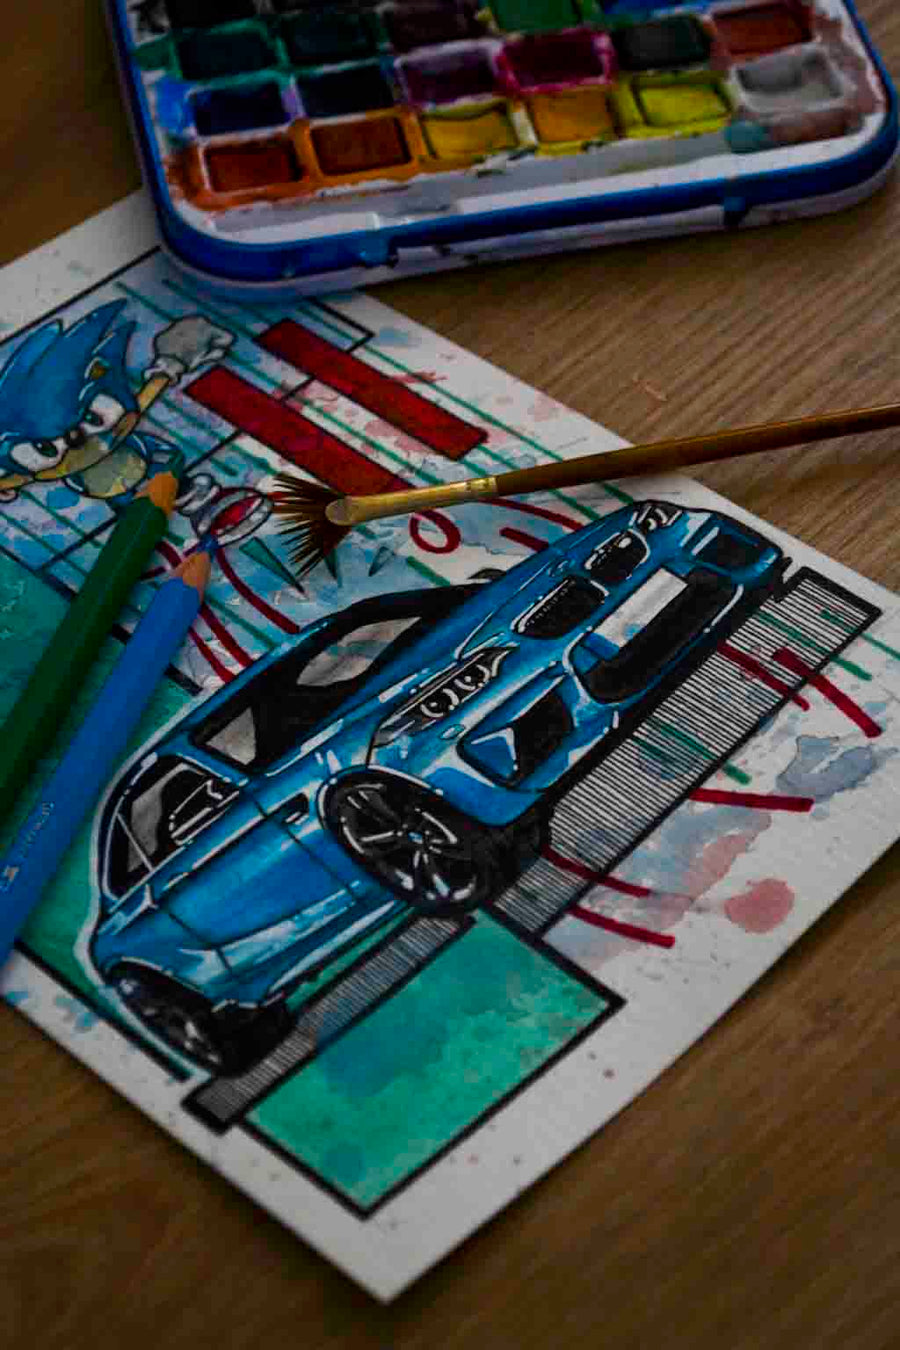 Inspiration from @m2_lbb /BMW M2 Handmade Artwork and Coloring Pages (Option Puzzle)